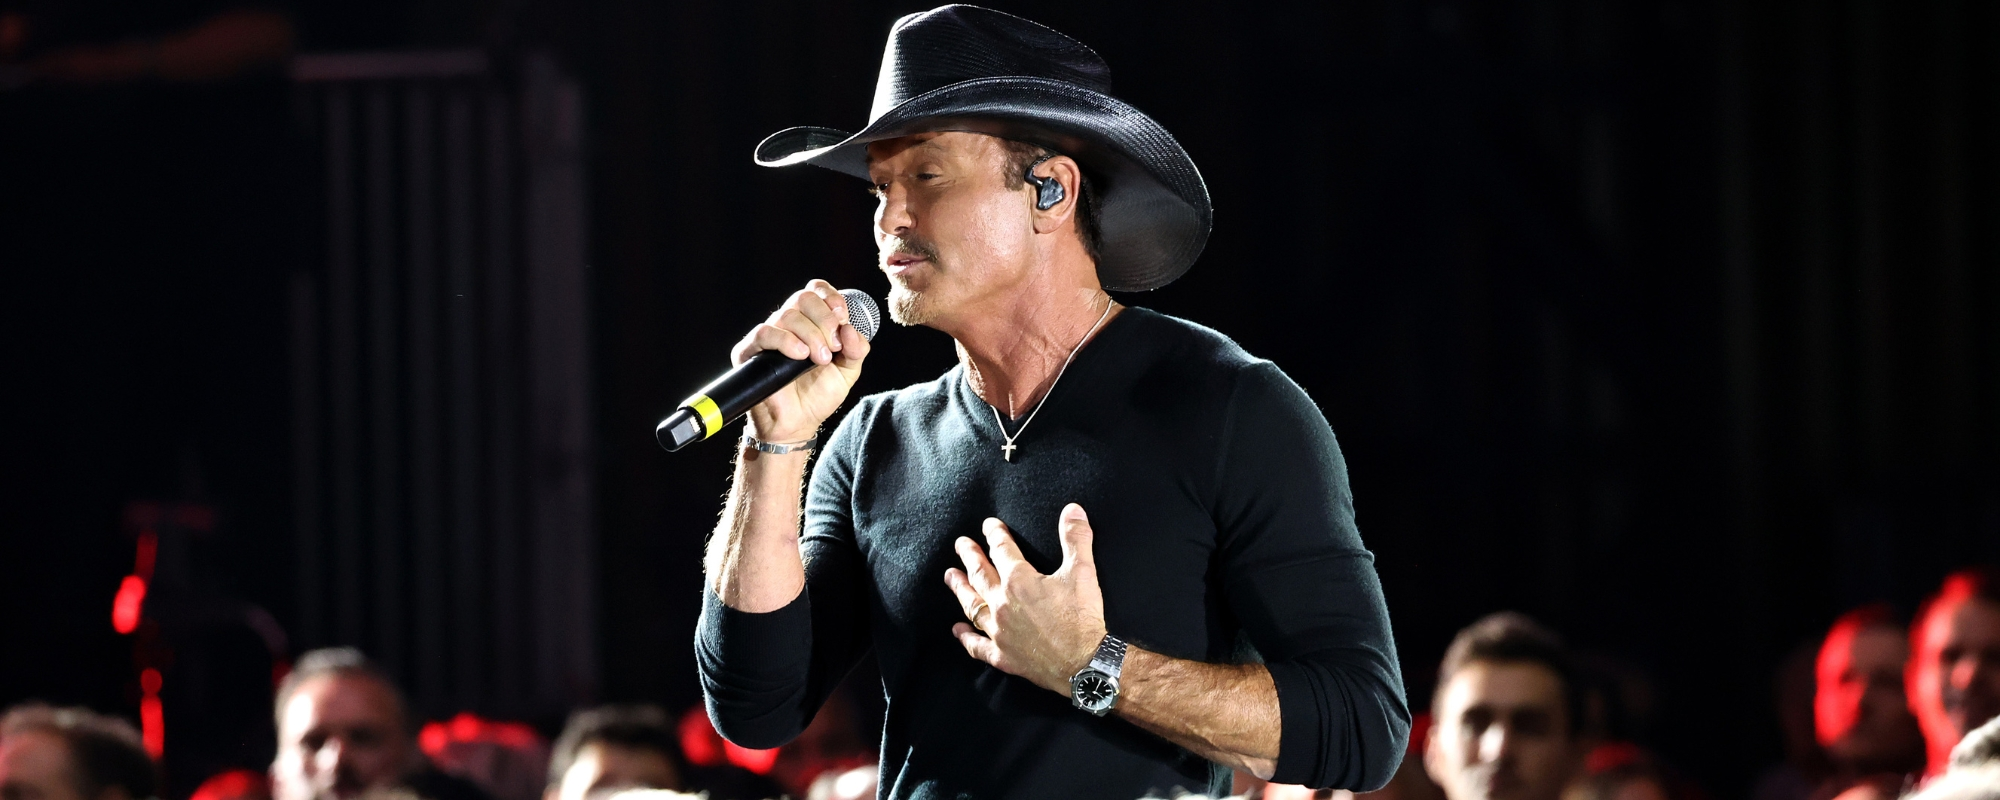 Tim McGraw Breaks Chart Record Previously Held by George Strait with His Latest No. 1 Single “Standing Room Only”